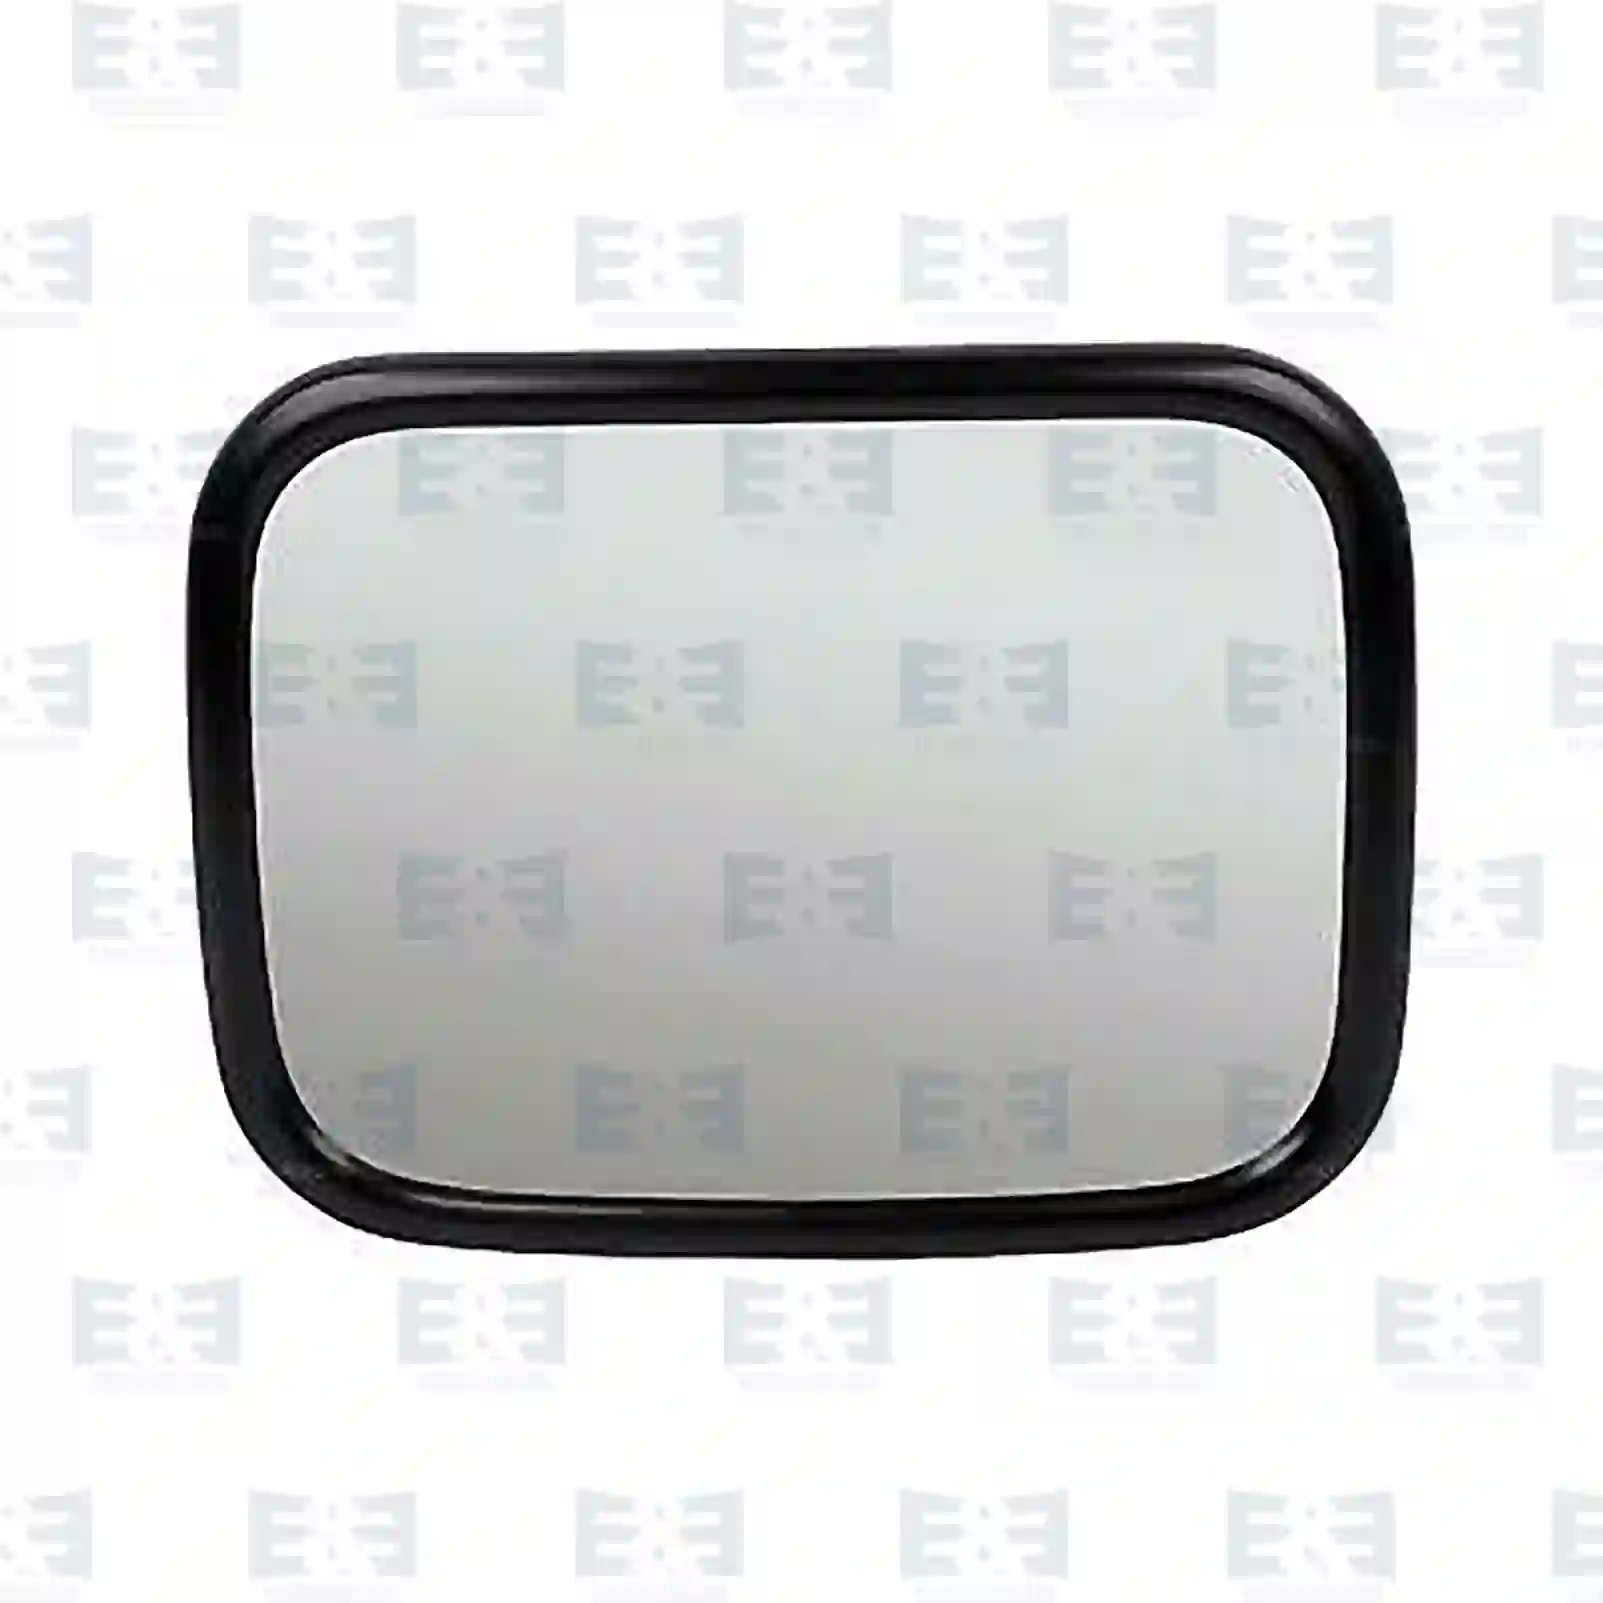 Mirror Wide view mirror, heated, EE No 2E2292571 ,  oem no:81637306223, 81637306236, 81637306242, 81637306248, 81637306299, 81637306324, 81637306736, 85637306013, 85637306014, 85637306028, N1011035952, 3090390 E&E Truck Spare Parts | Truck Spare Parts, Auotomotive Spare Parts